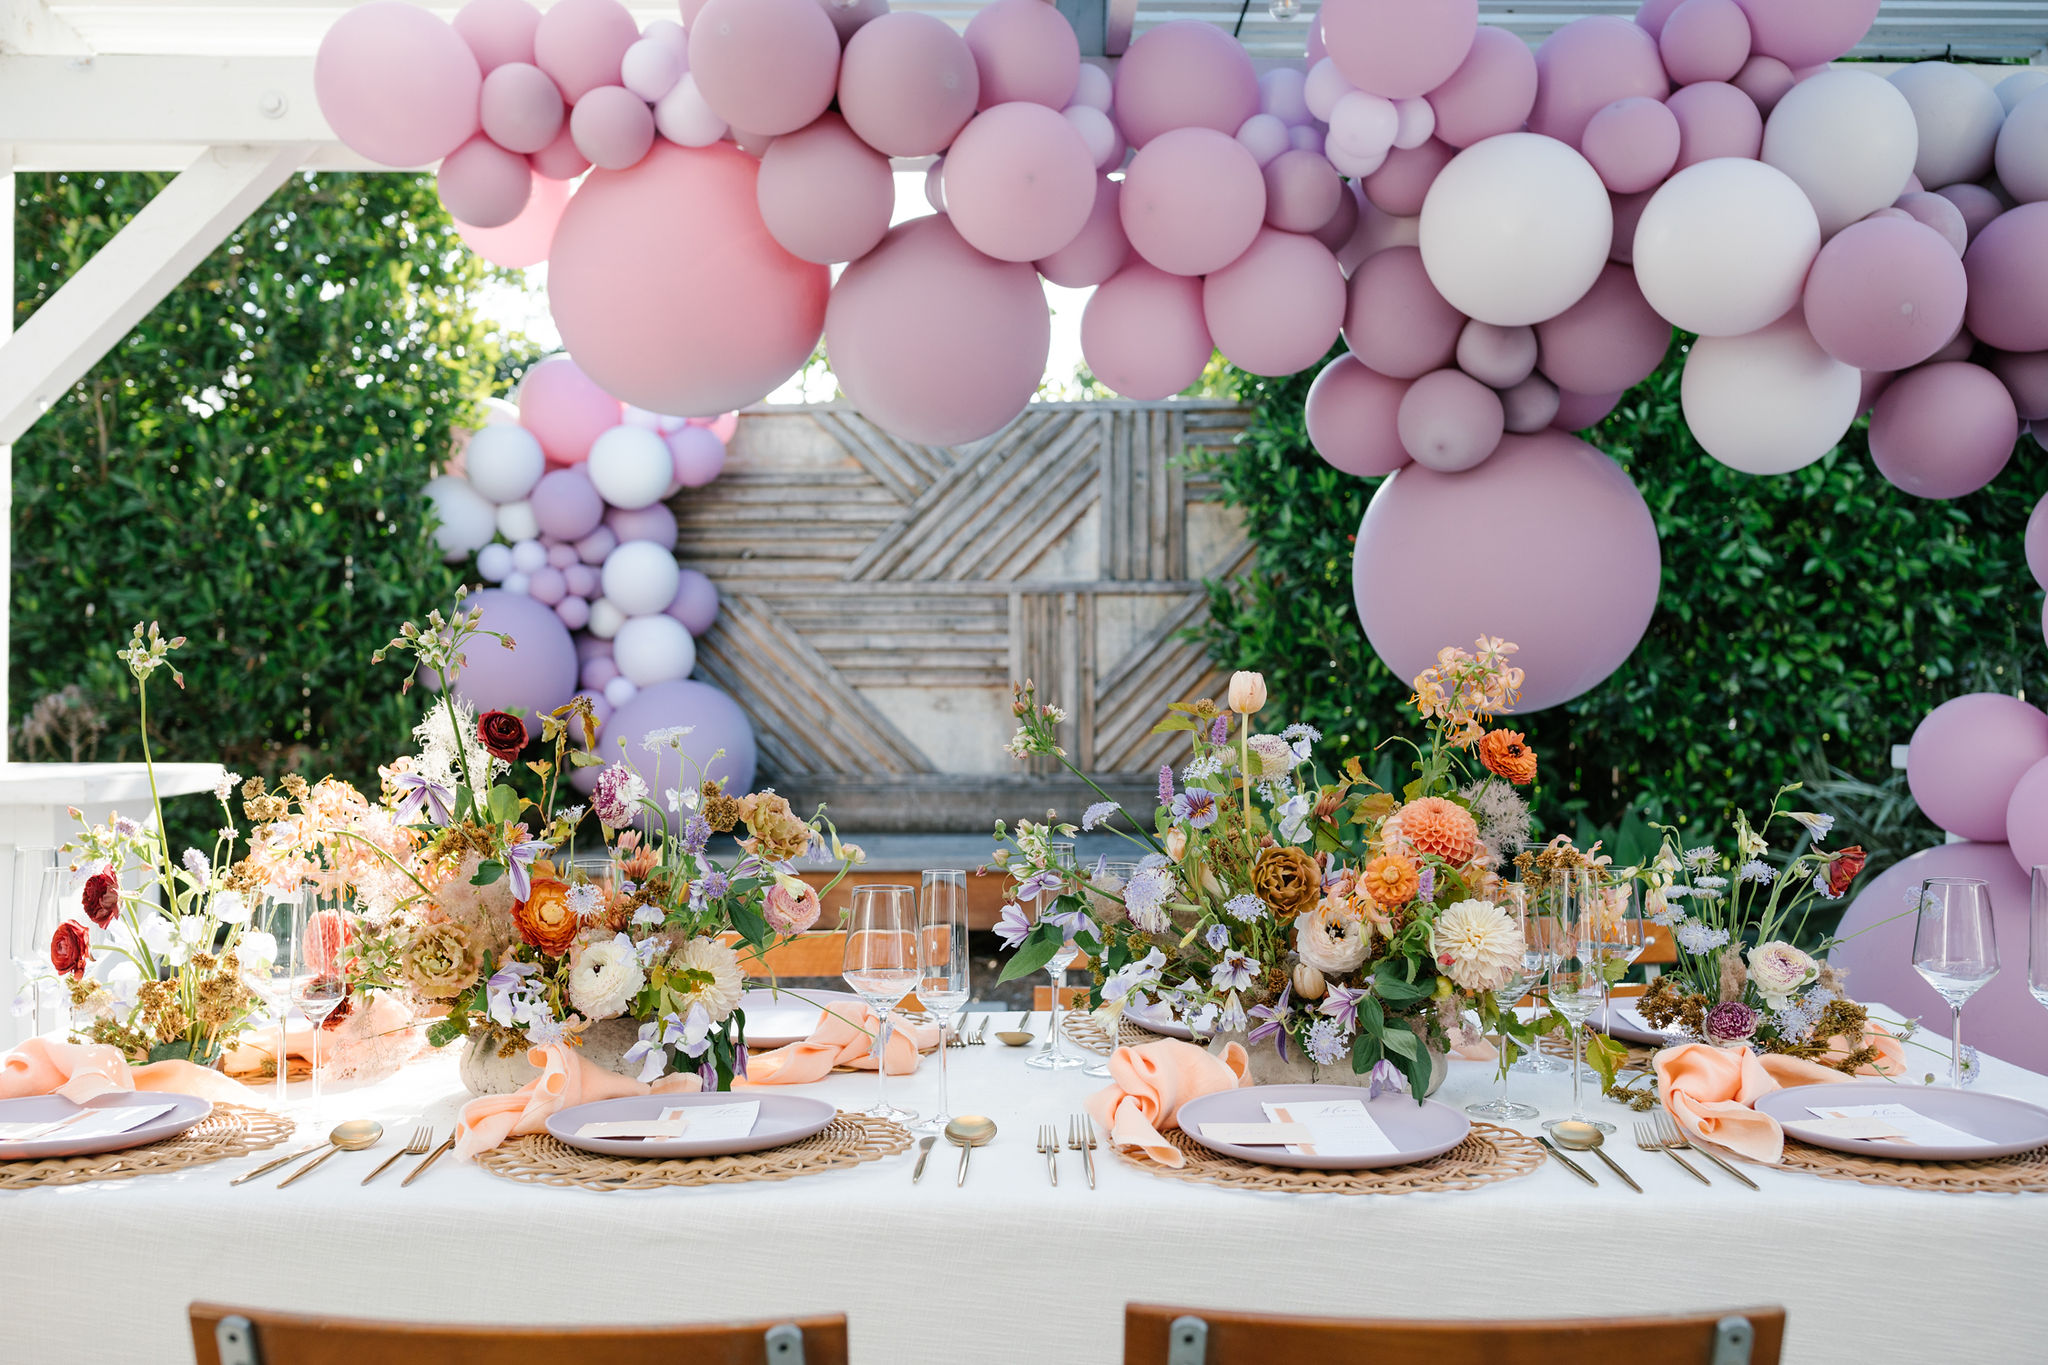 5 Steps to Throw a Gorgeous Backyard Bridal Shower with Harry & David